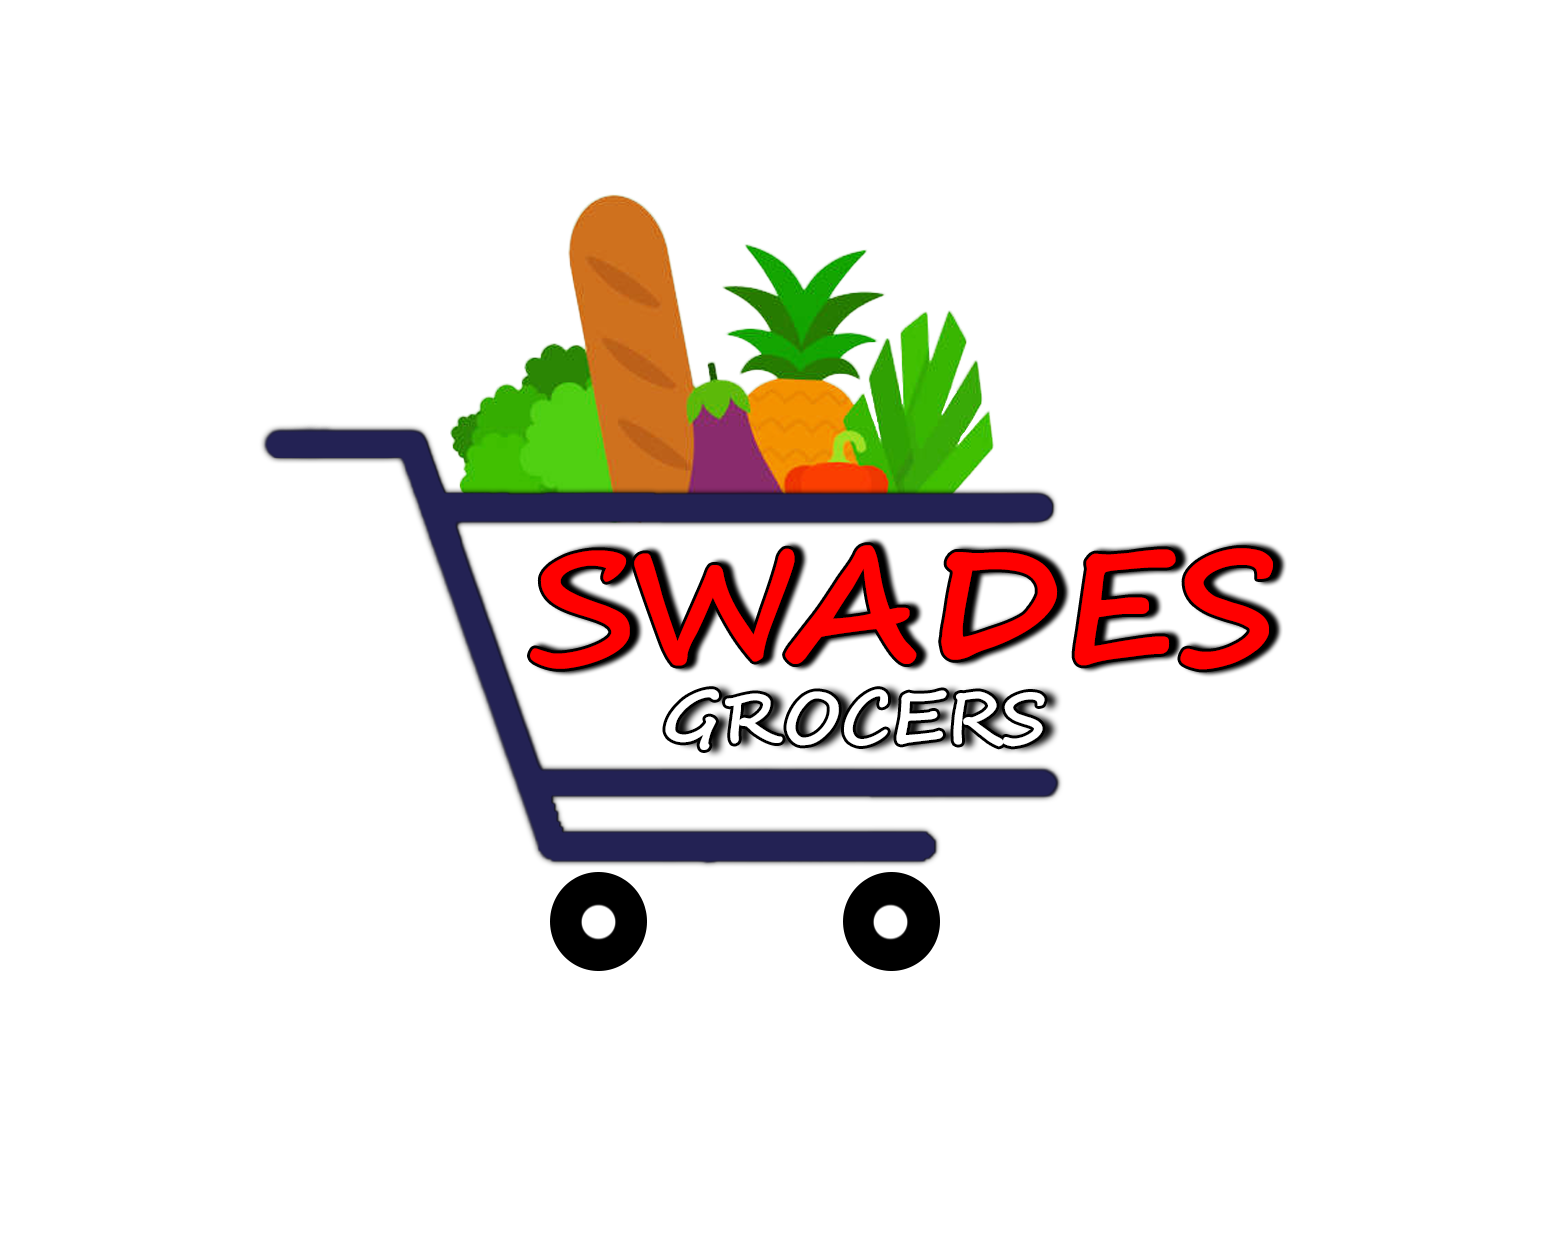 Swades Grocers